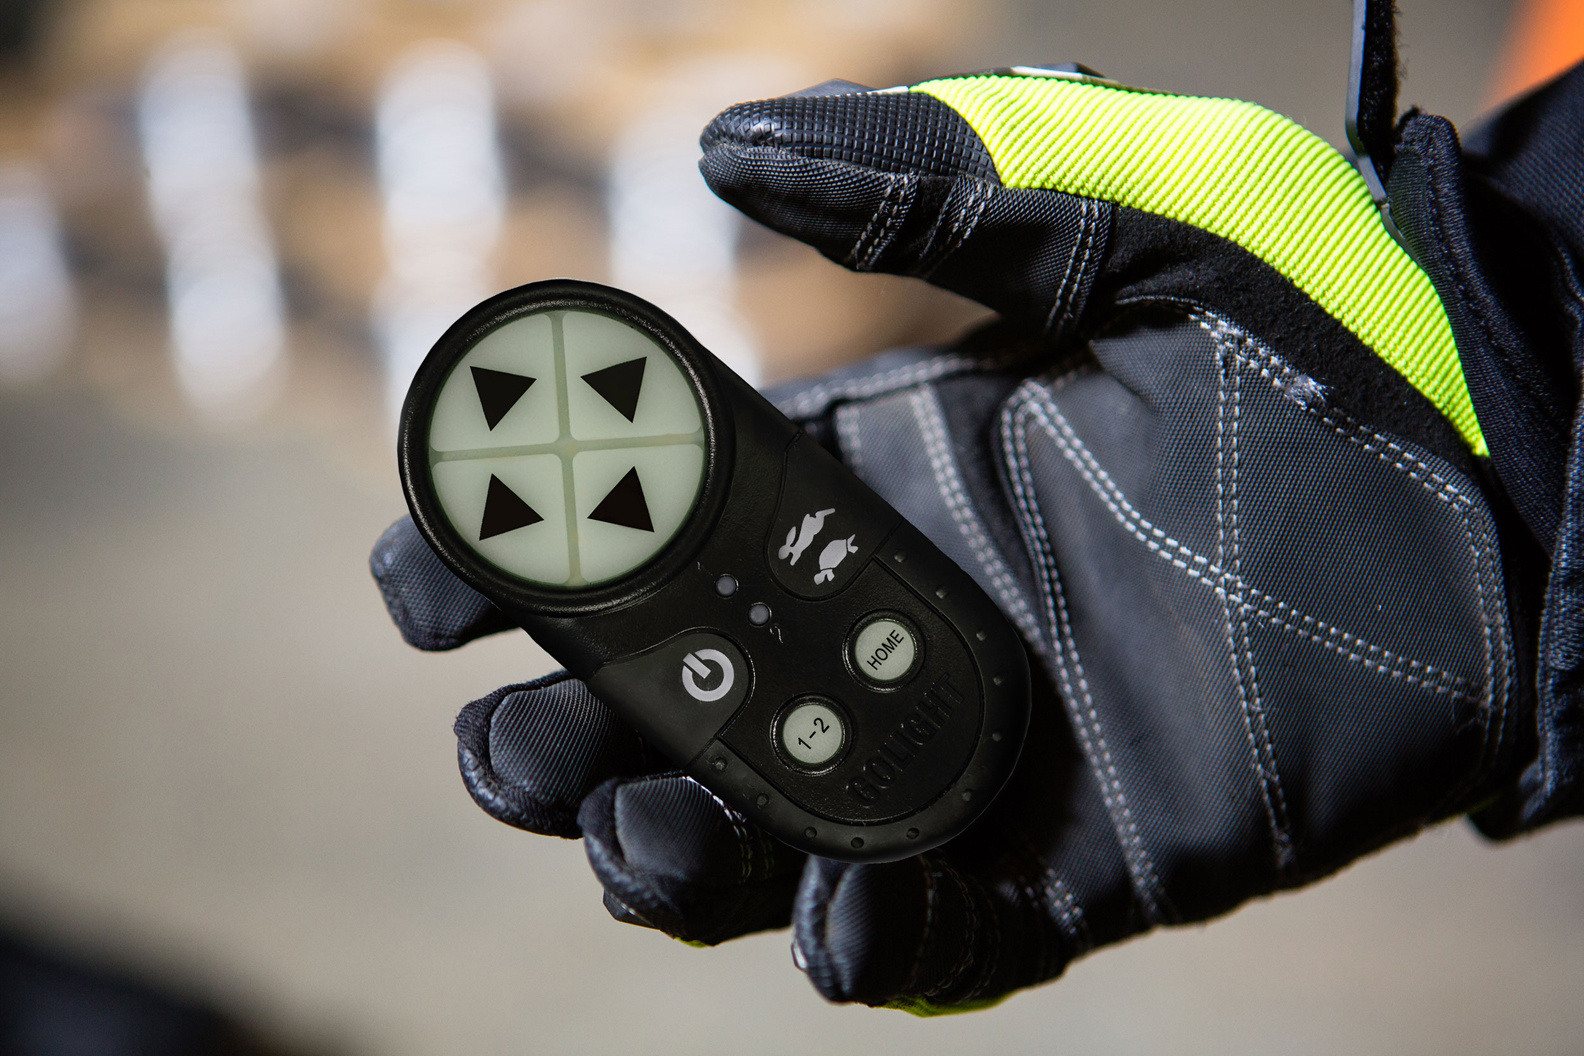 Large buttons are easy to access even with gloved hands, and fluorescent iconography makes the controller buttons legible in dark or low-light conditions.